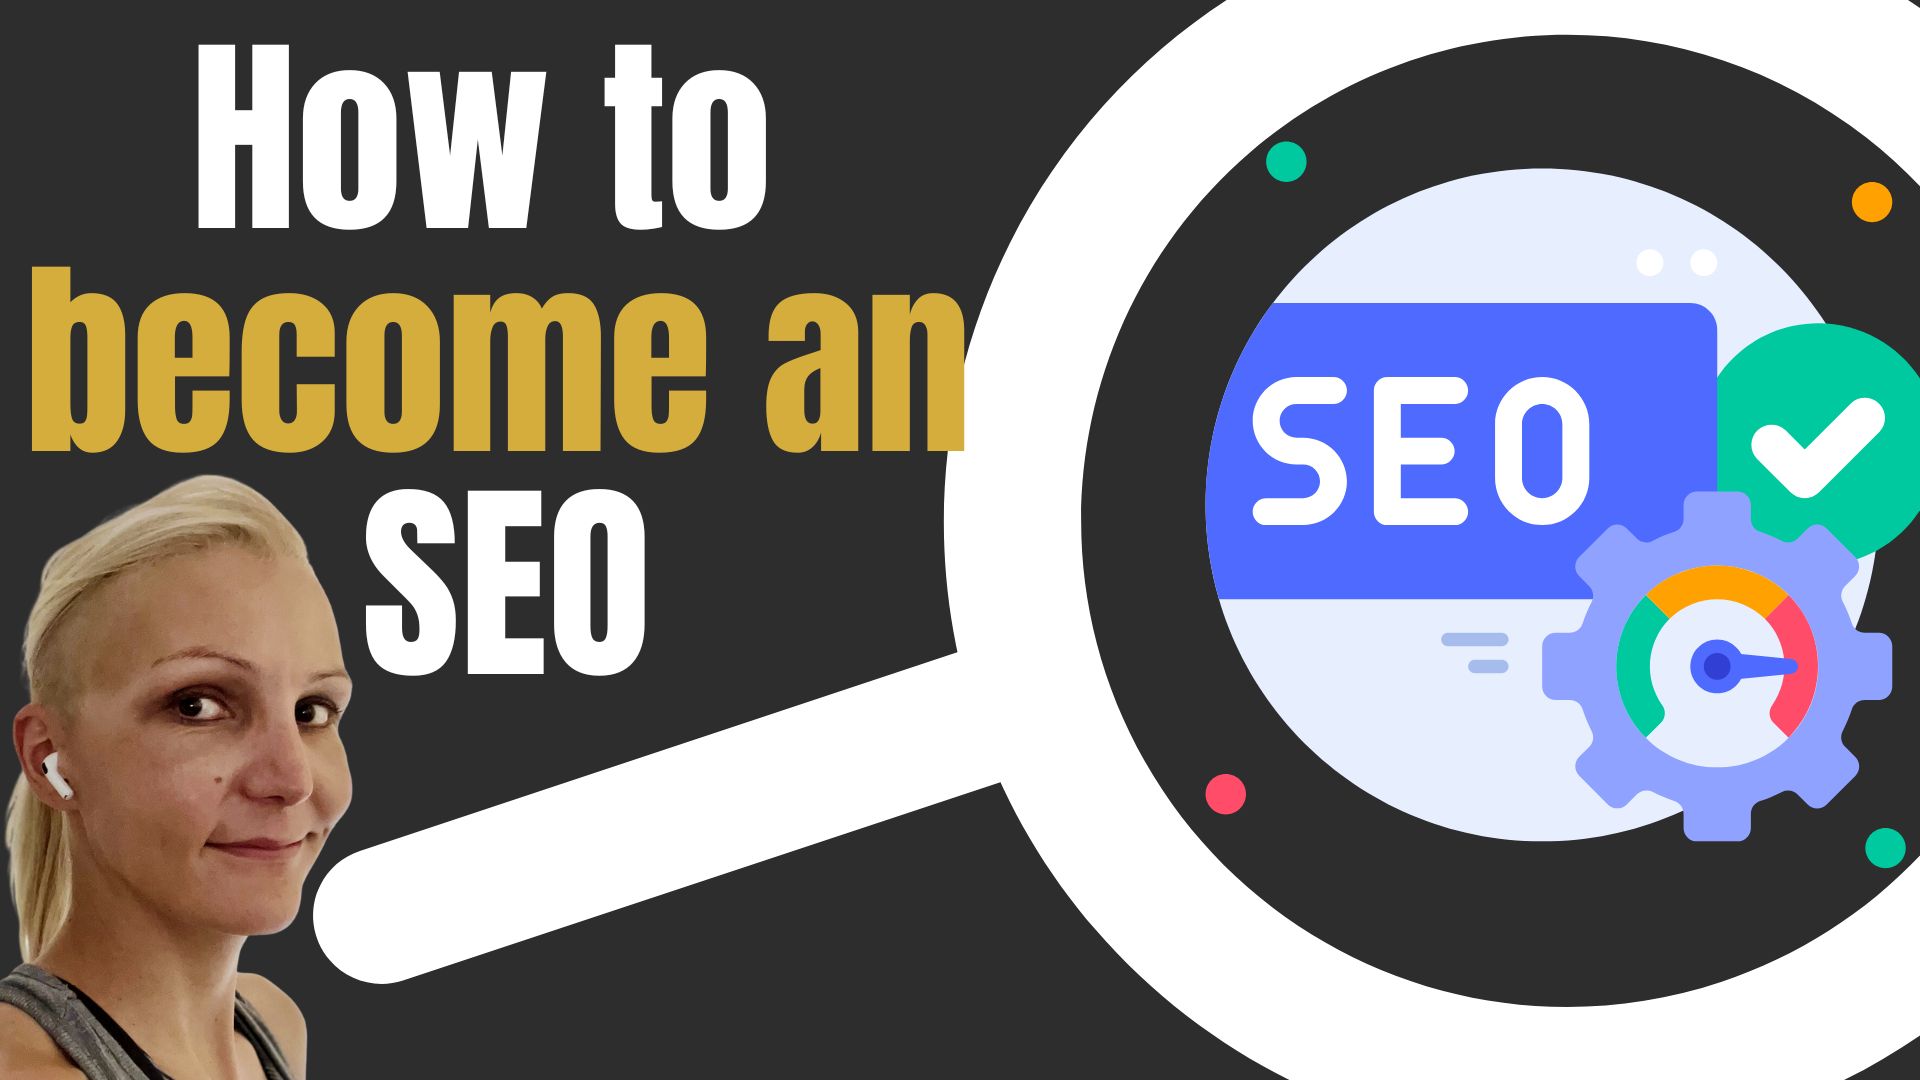 How To Become An SEO – SEOSLY